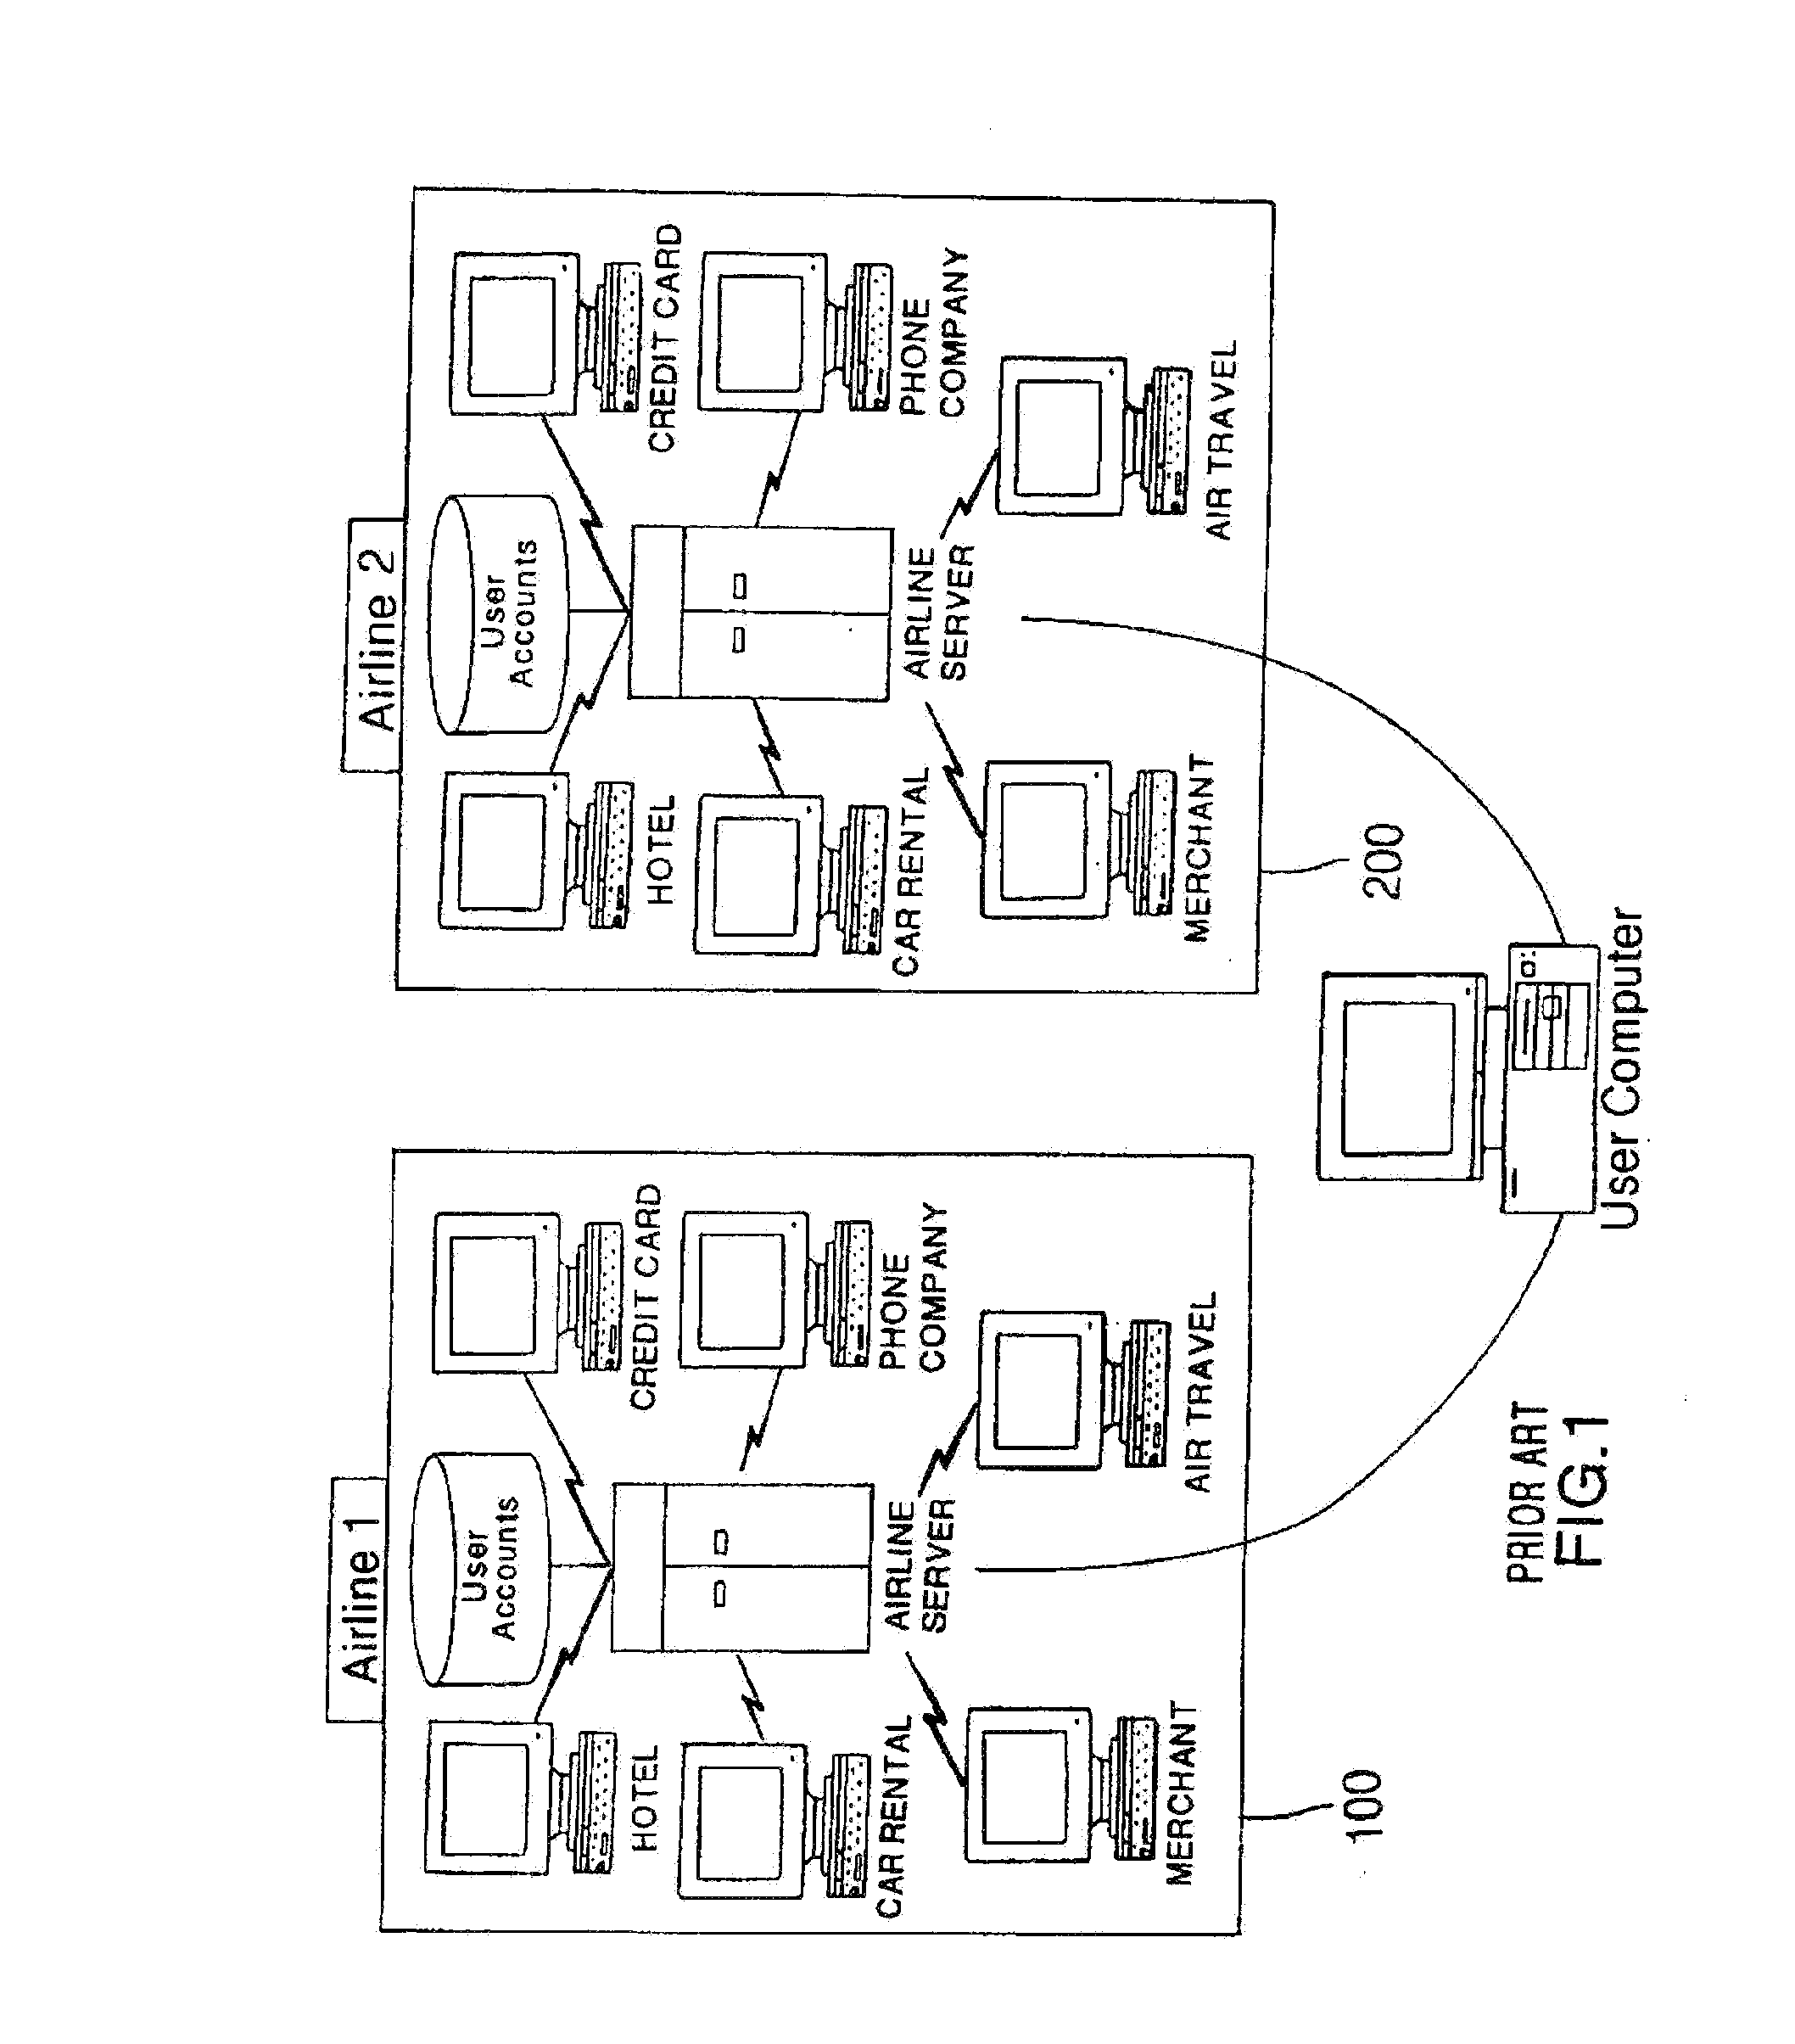 Method and system for issuing, aggregating and redeeming merchant rewards